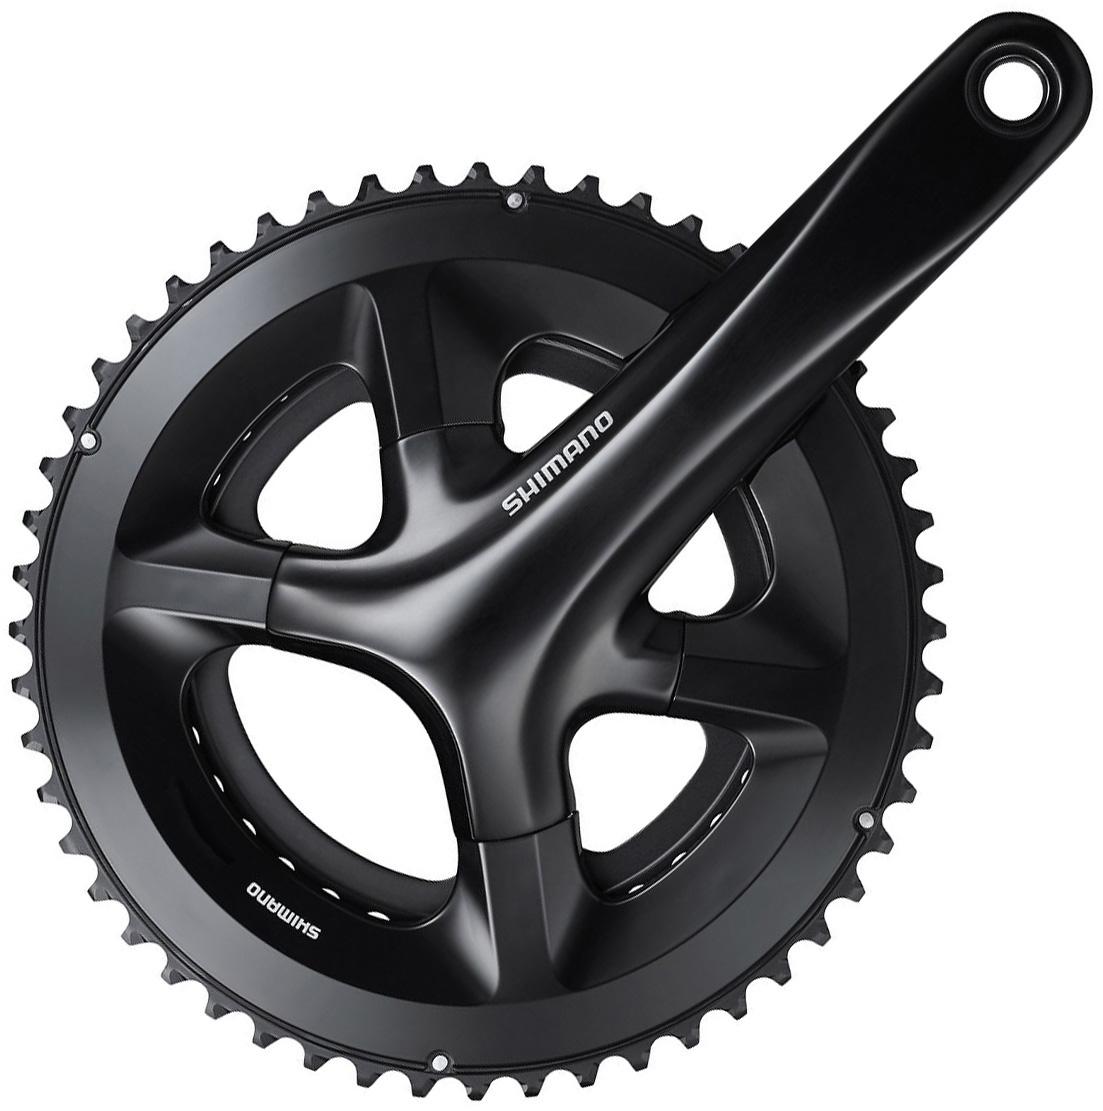 Shimano Rs520 12 Speed Double Chainset - Black